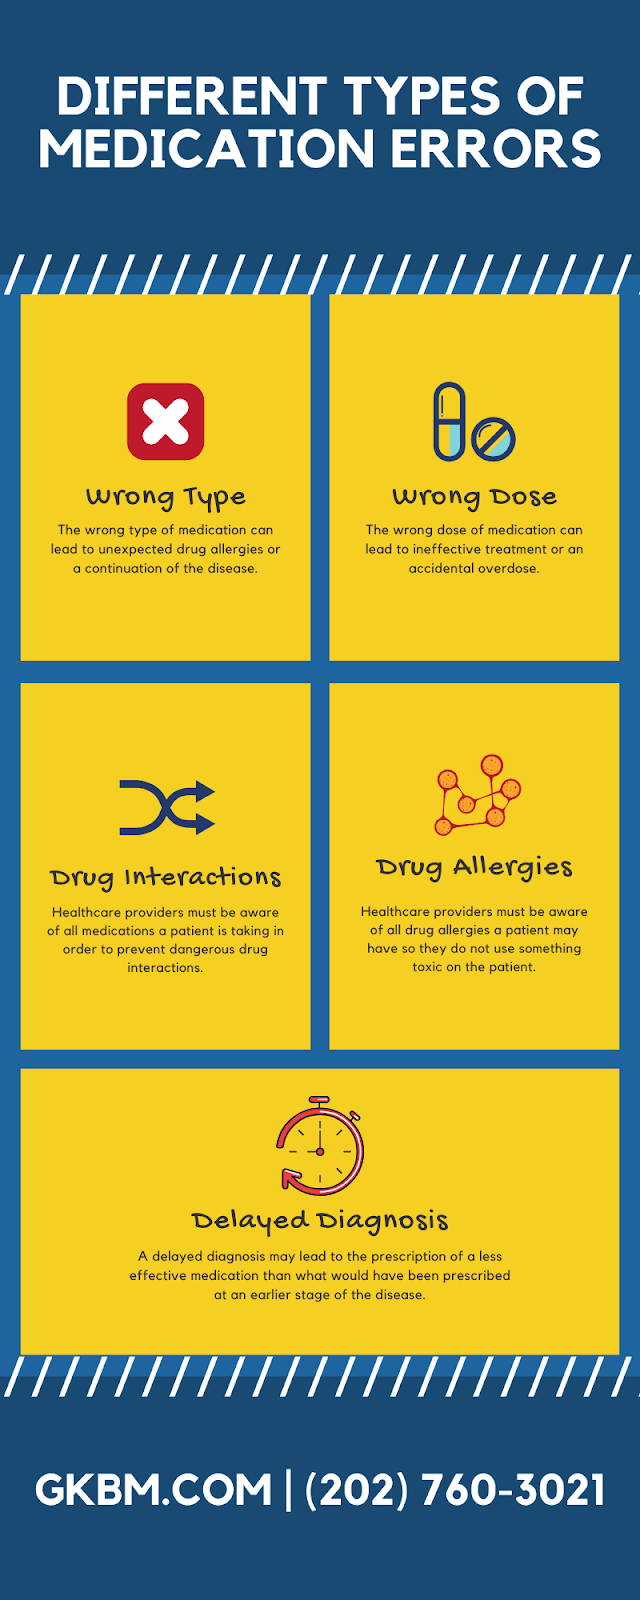 Different Types of Medication Errors - Infographic